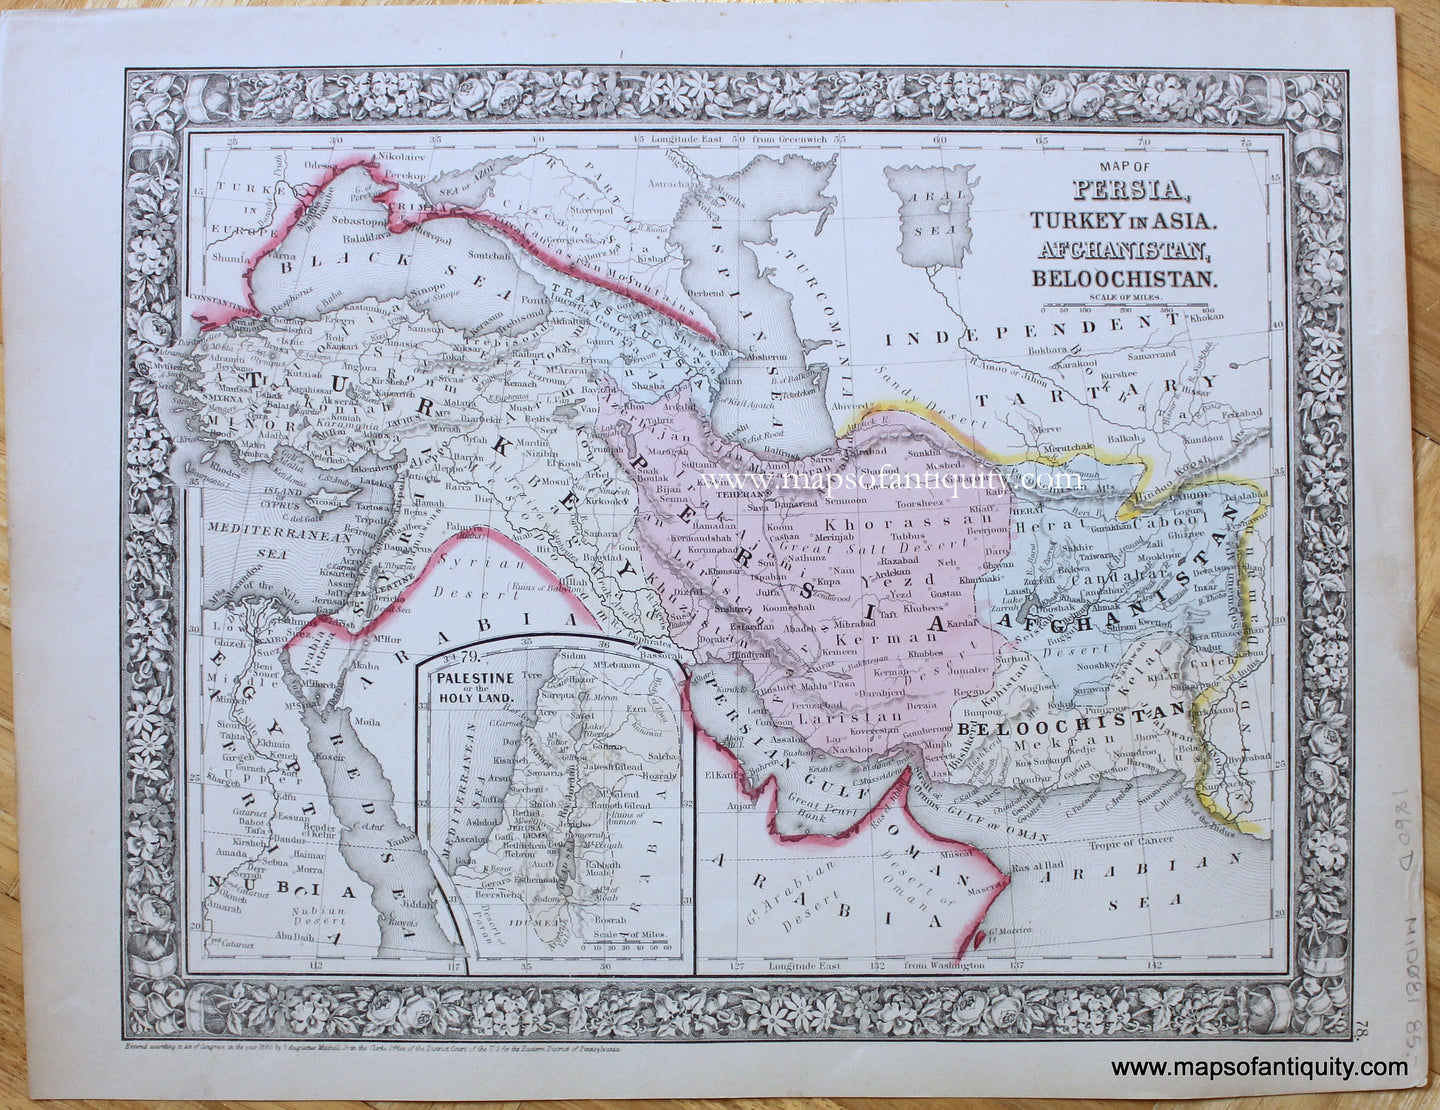 Antique-Hand-Colored-Map-Map-of-Persia-Turkey-in-Asia-Afghanistan-and-Beloochistan-(Iran)-with-inset-of-Palestine-or-the-Holy-Land.--Middle-East-and-Holy-Land-Middle-East-1860-Mitchell-Maps-Of-Antiquity